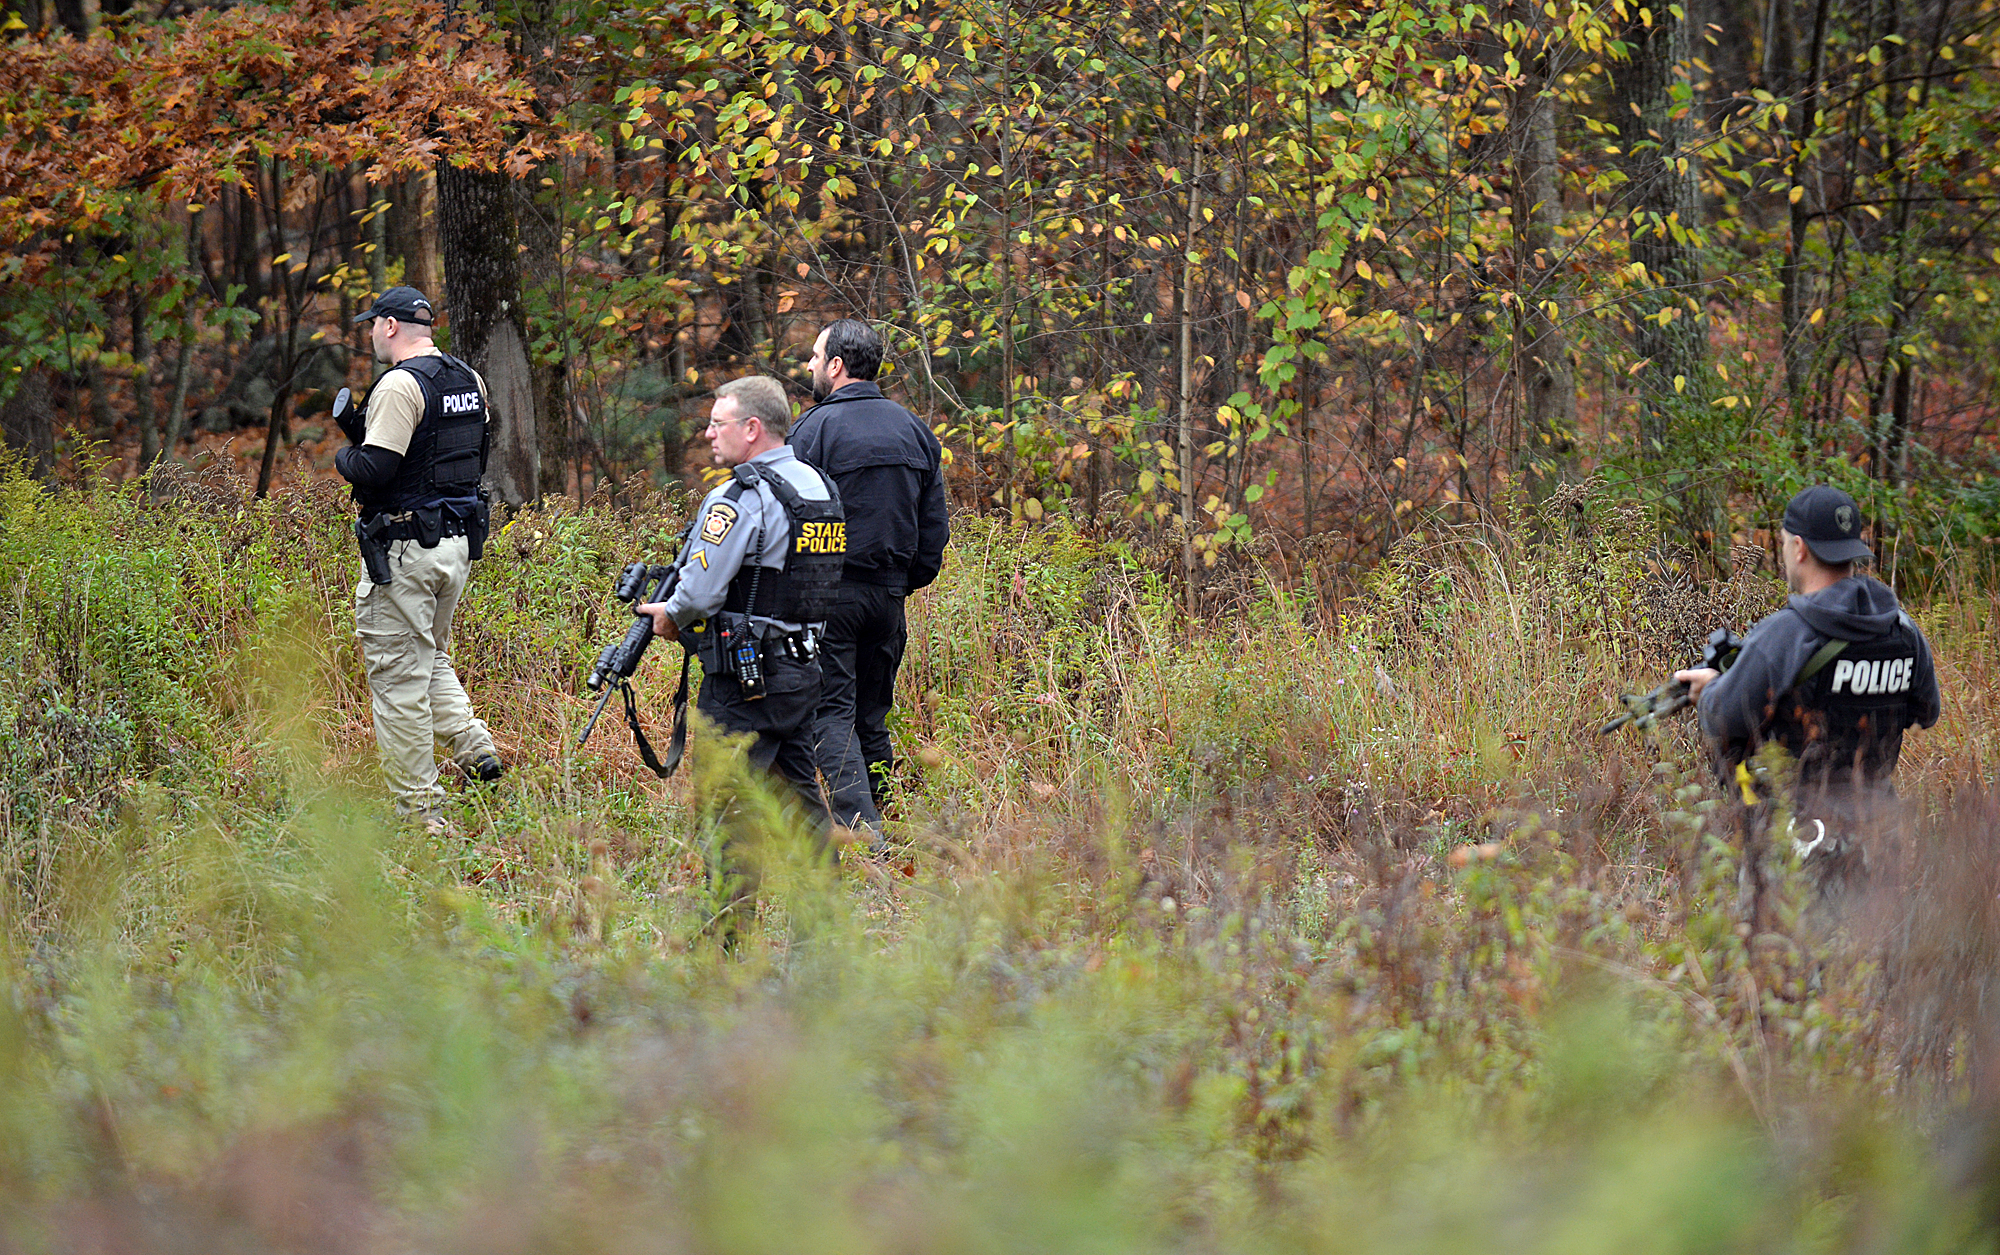 PHOTO: Police search an area in Price Townhsip Pa., near Alpine Ski Resort, Oct. 11, 2014, as they look for Eric Frein, the suspect in last month's deadly ambush at a state police barracks. 